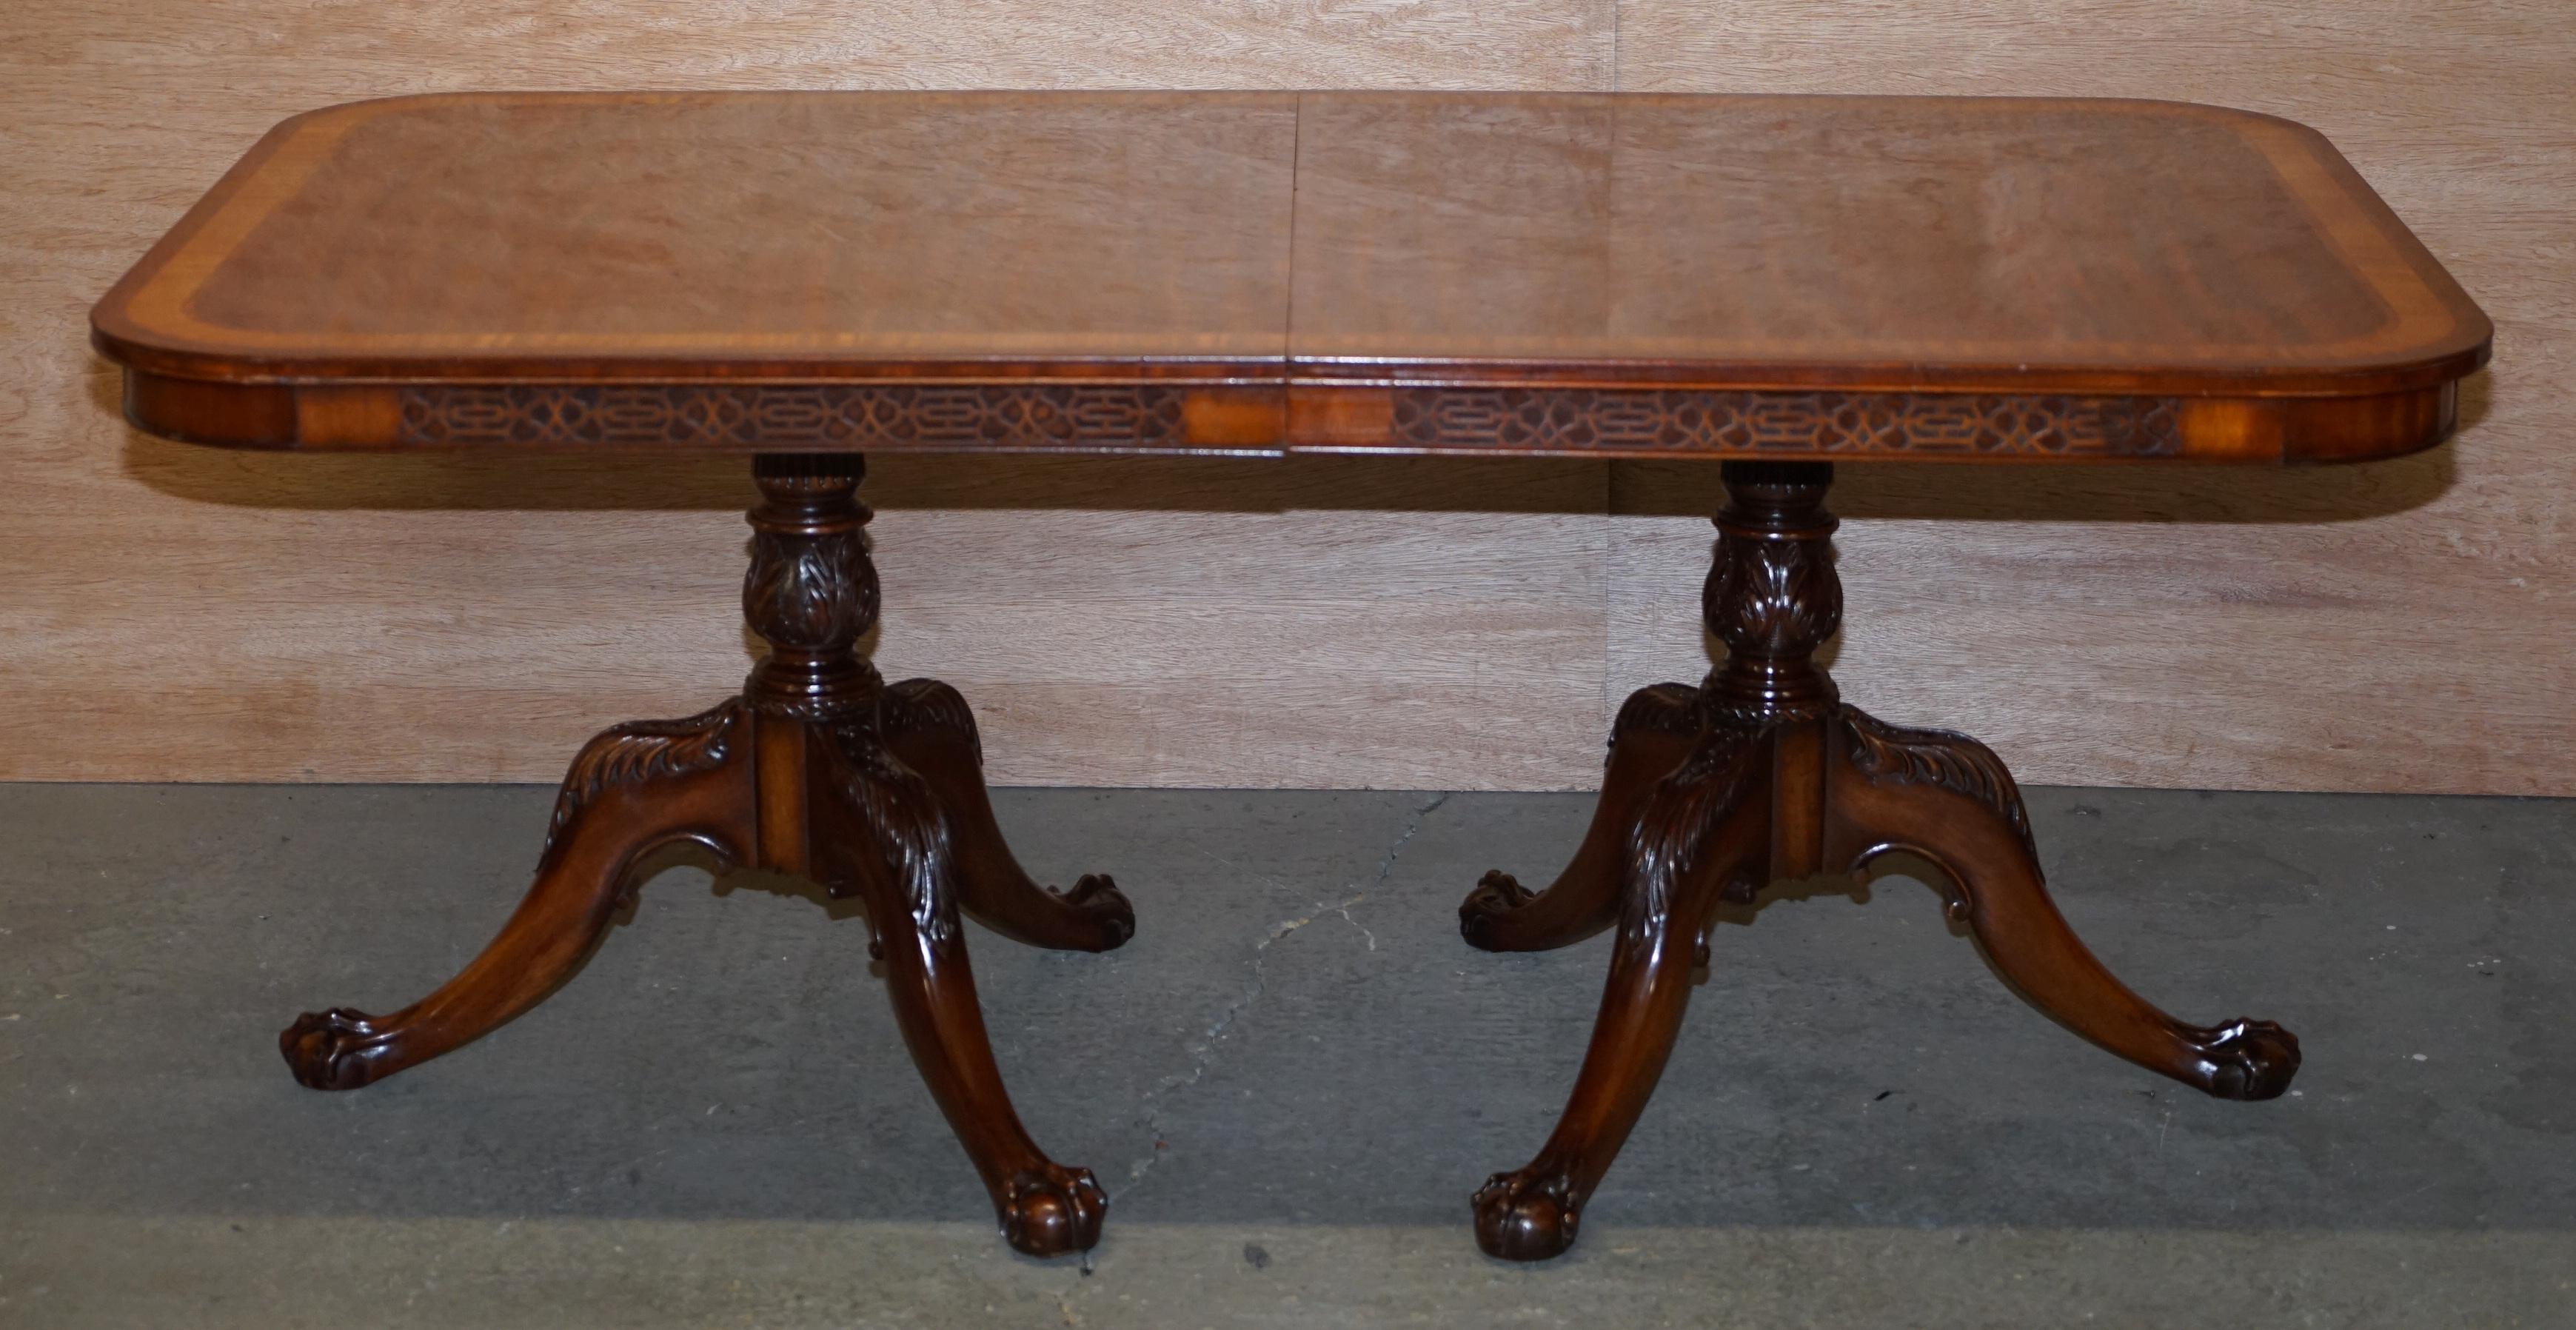 Wimbledon-Furniture

Wimbledon-Furniture is delighted to offer for sale this lovely hand made in England Thomas Chippendale style Brights of Nettlebed RRP £10,500 extending dining table with claw & ball pedestal bases

Please note the delivery